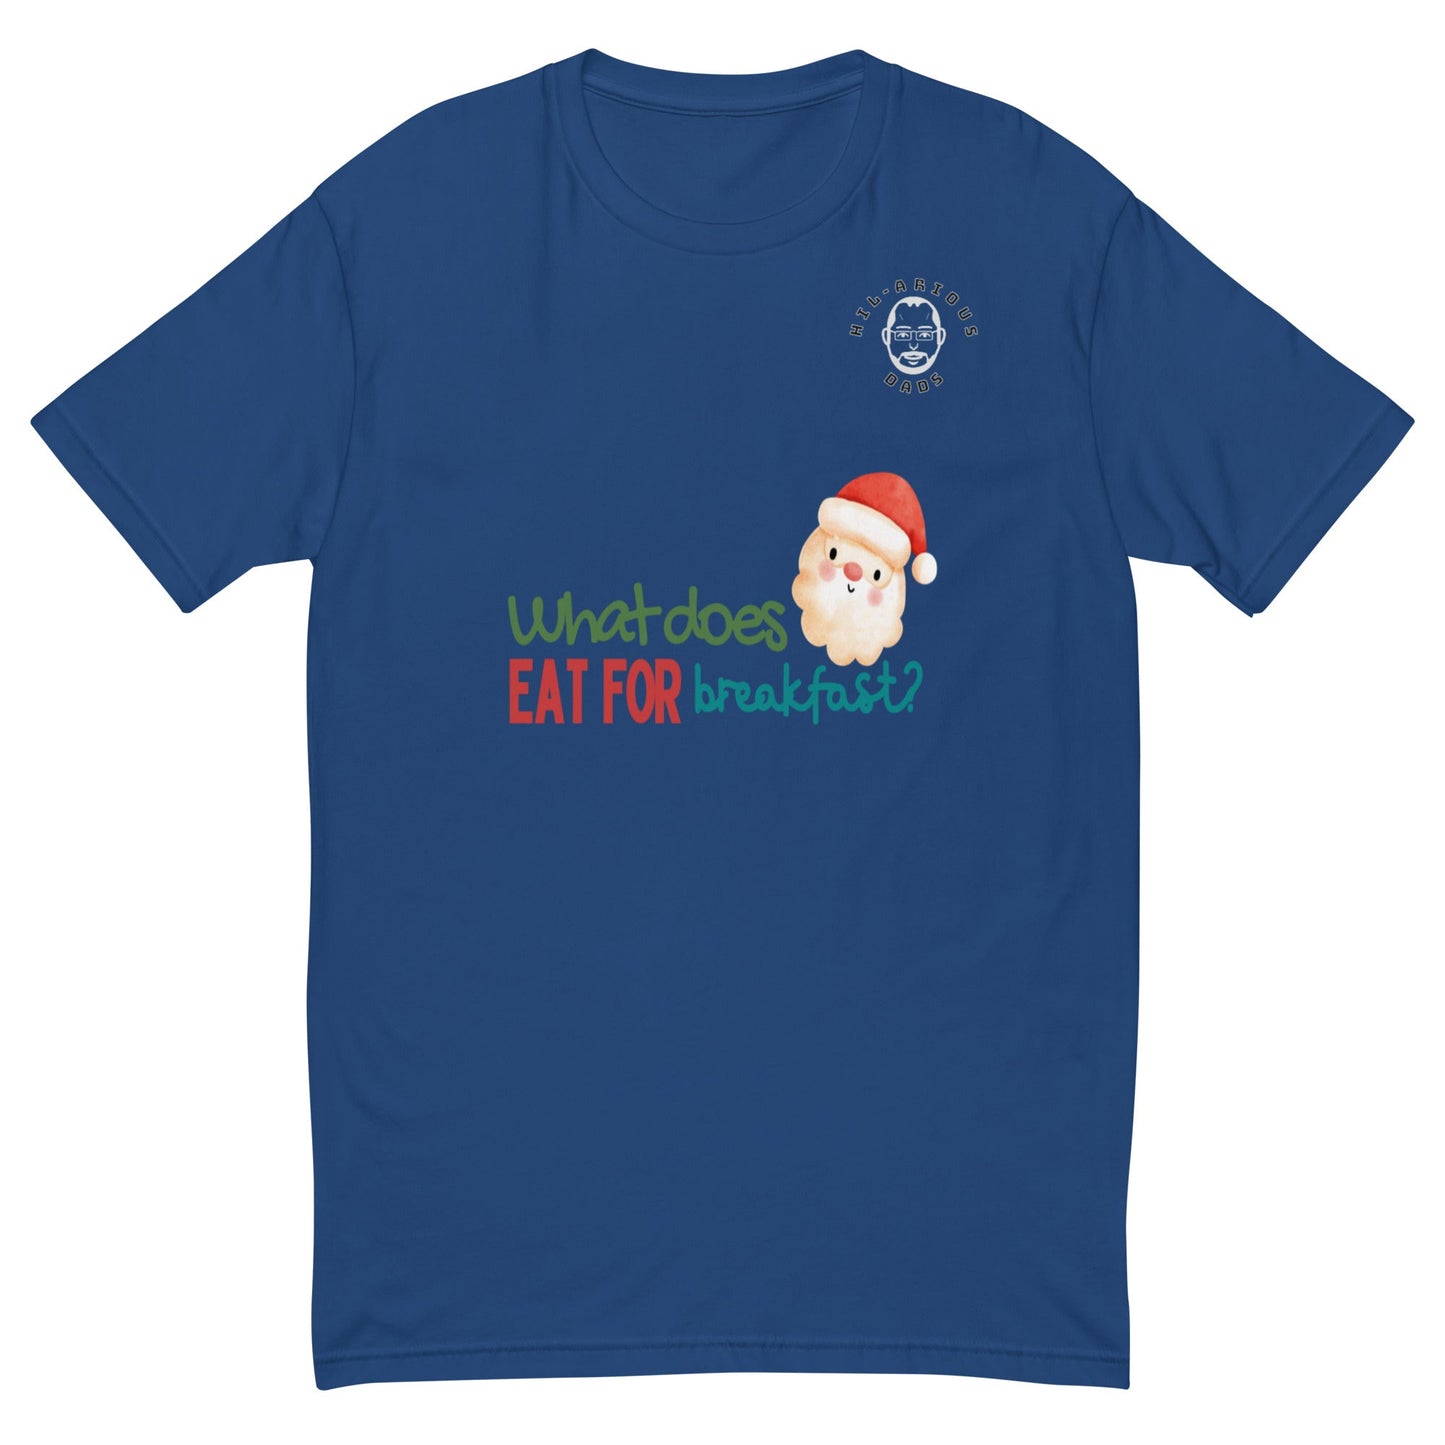 What does Santa eat for breakfast?-T-shirt - Hil-arious Dads